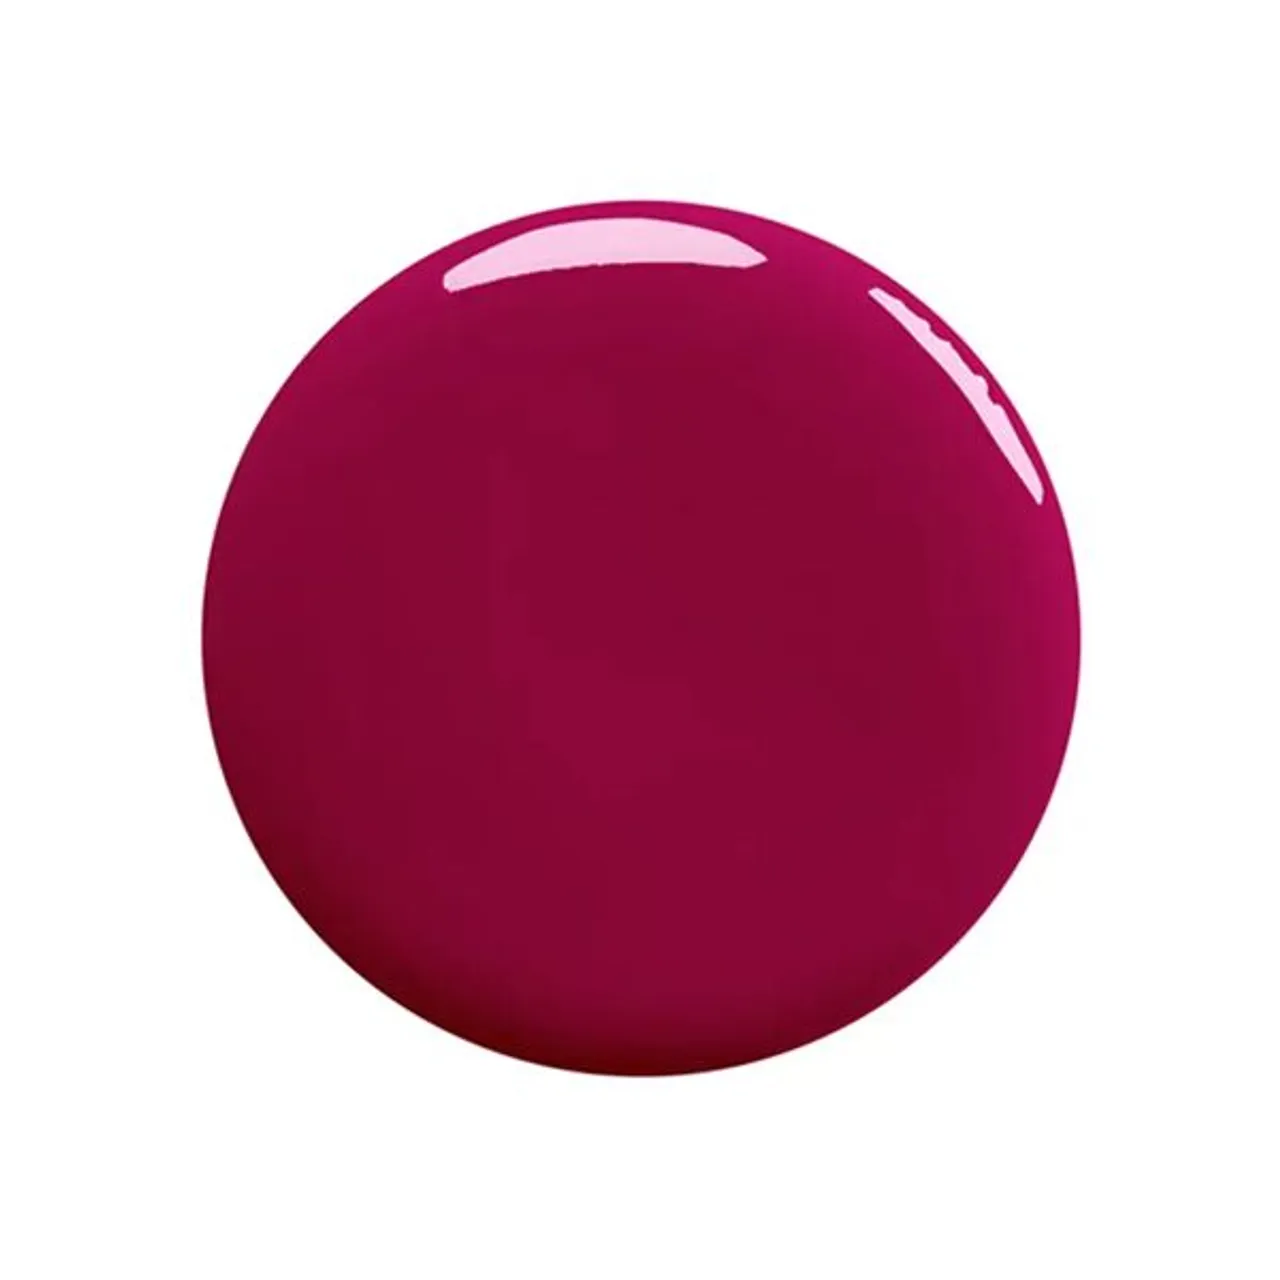 Nailberry L'OxygÃ©nÃ© Oxygenated Nail Lacquer - Raspberry - Unisex - Size: 15ml